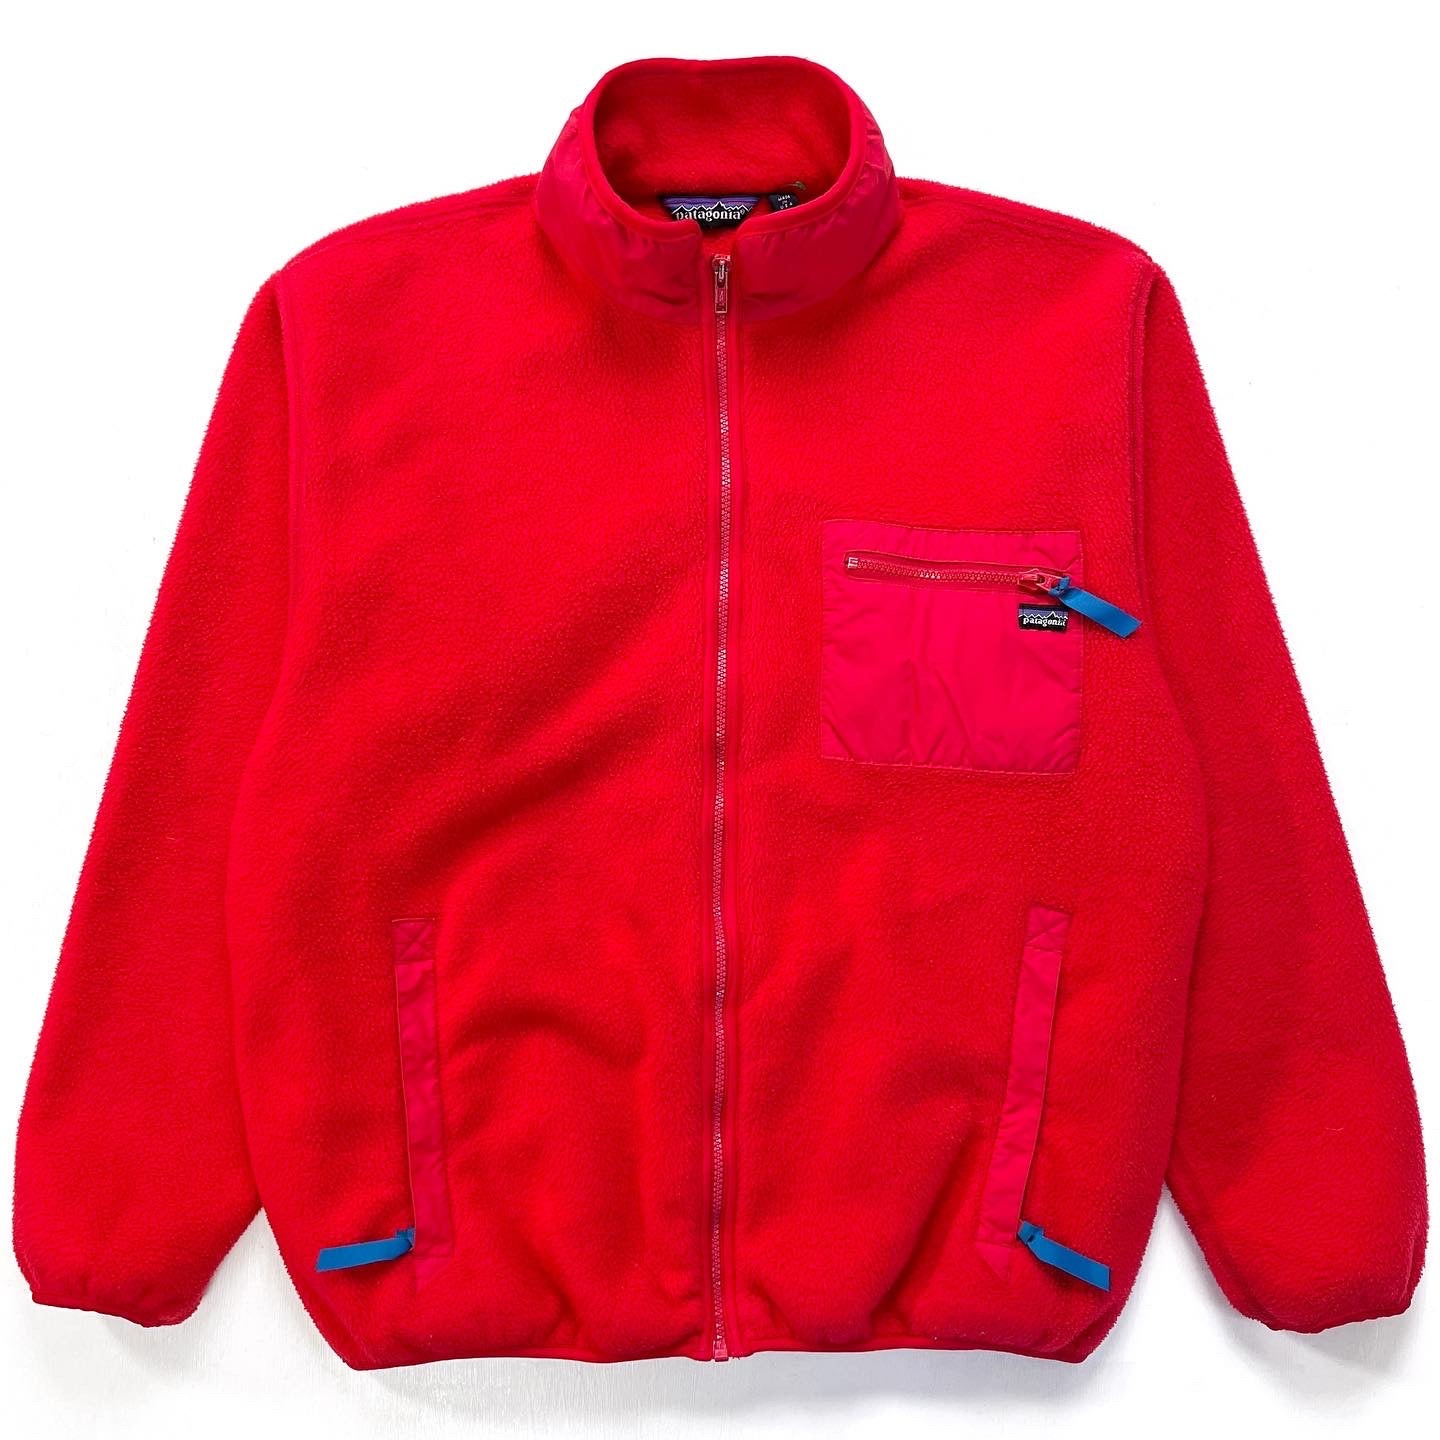 1988 Patagonia Made In The U.S.A. Synchilla Jacket, Grenadine (L/XL)